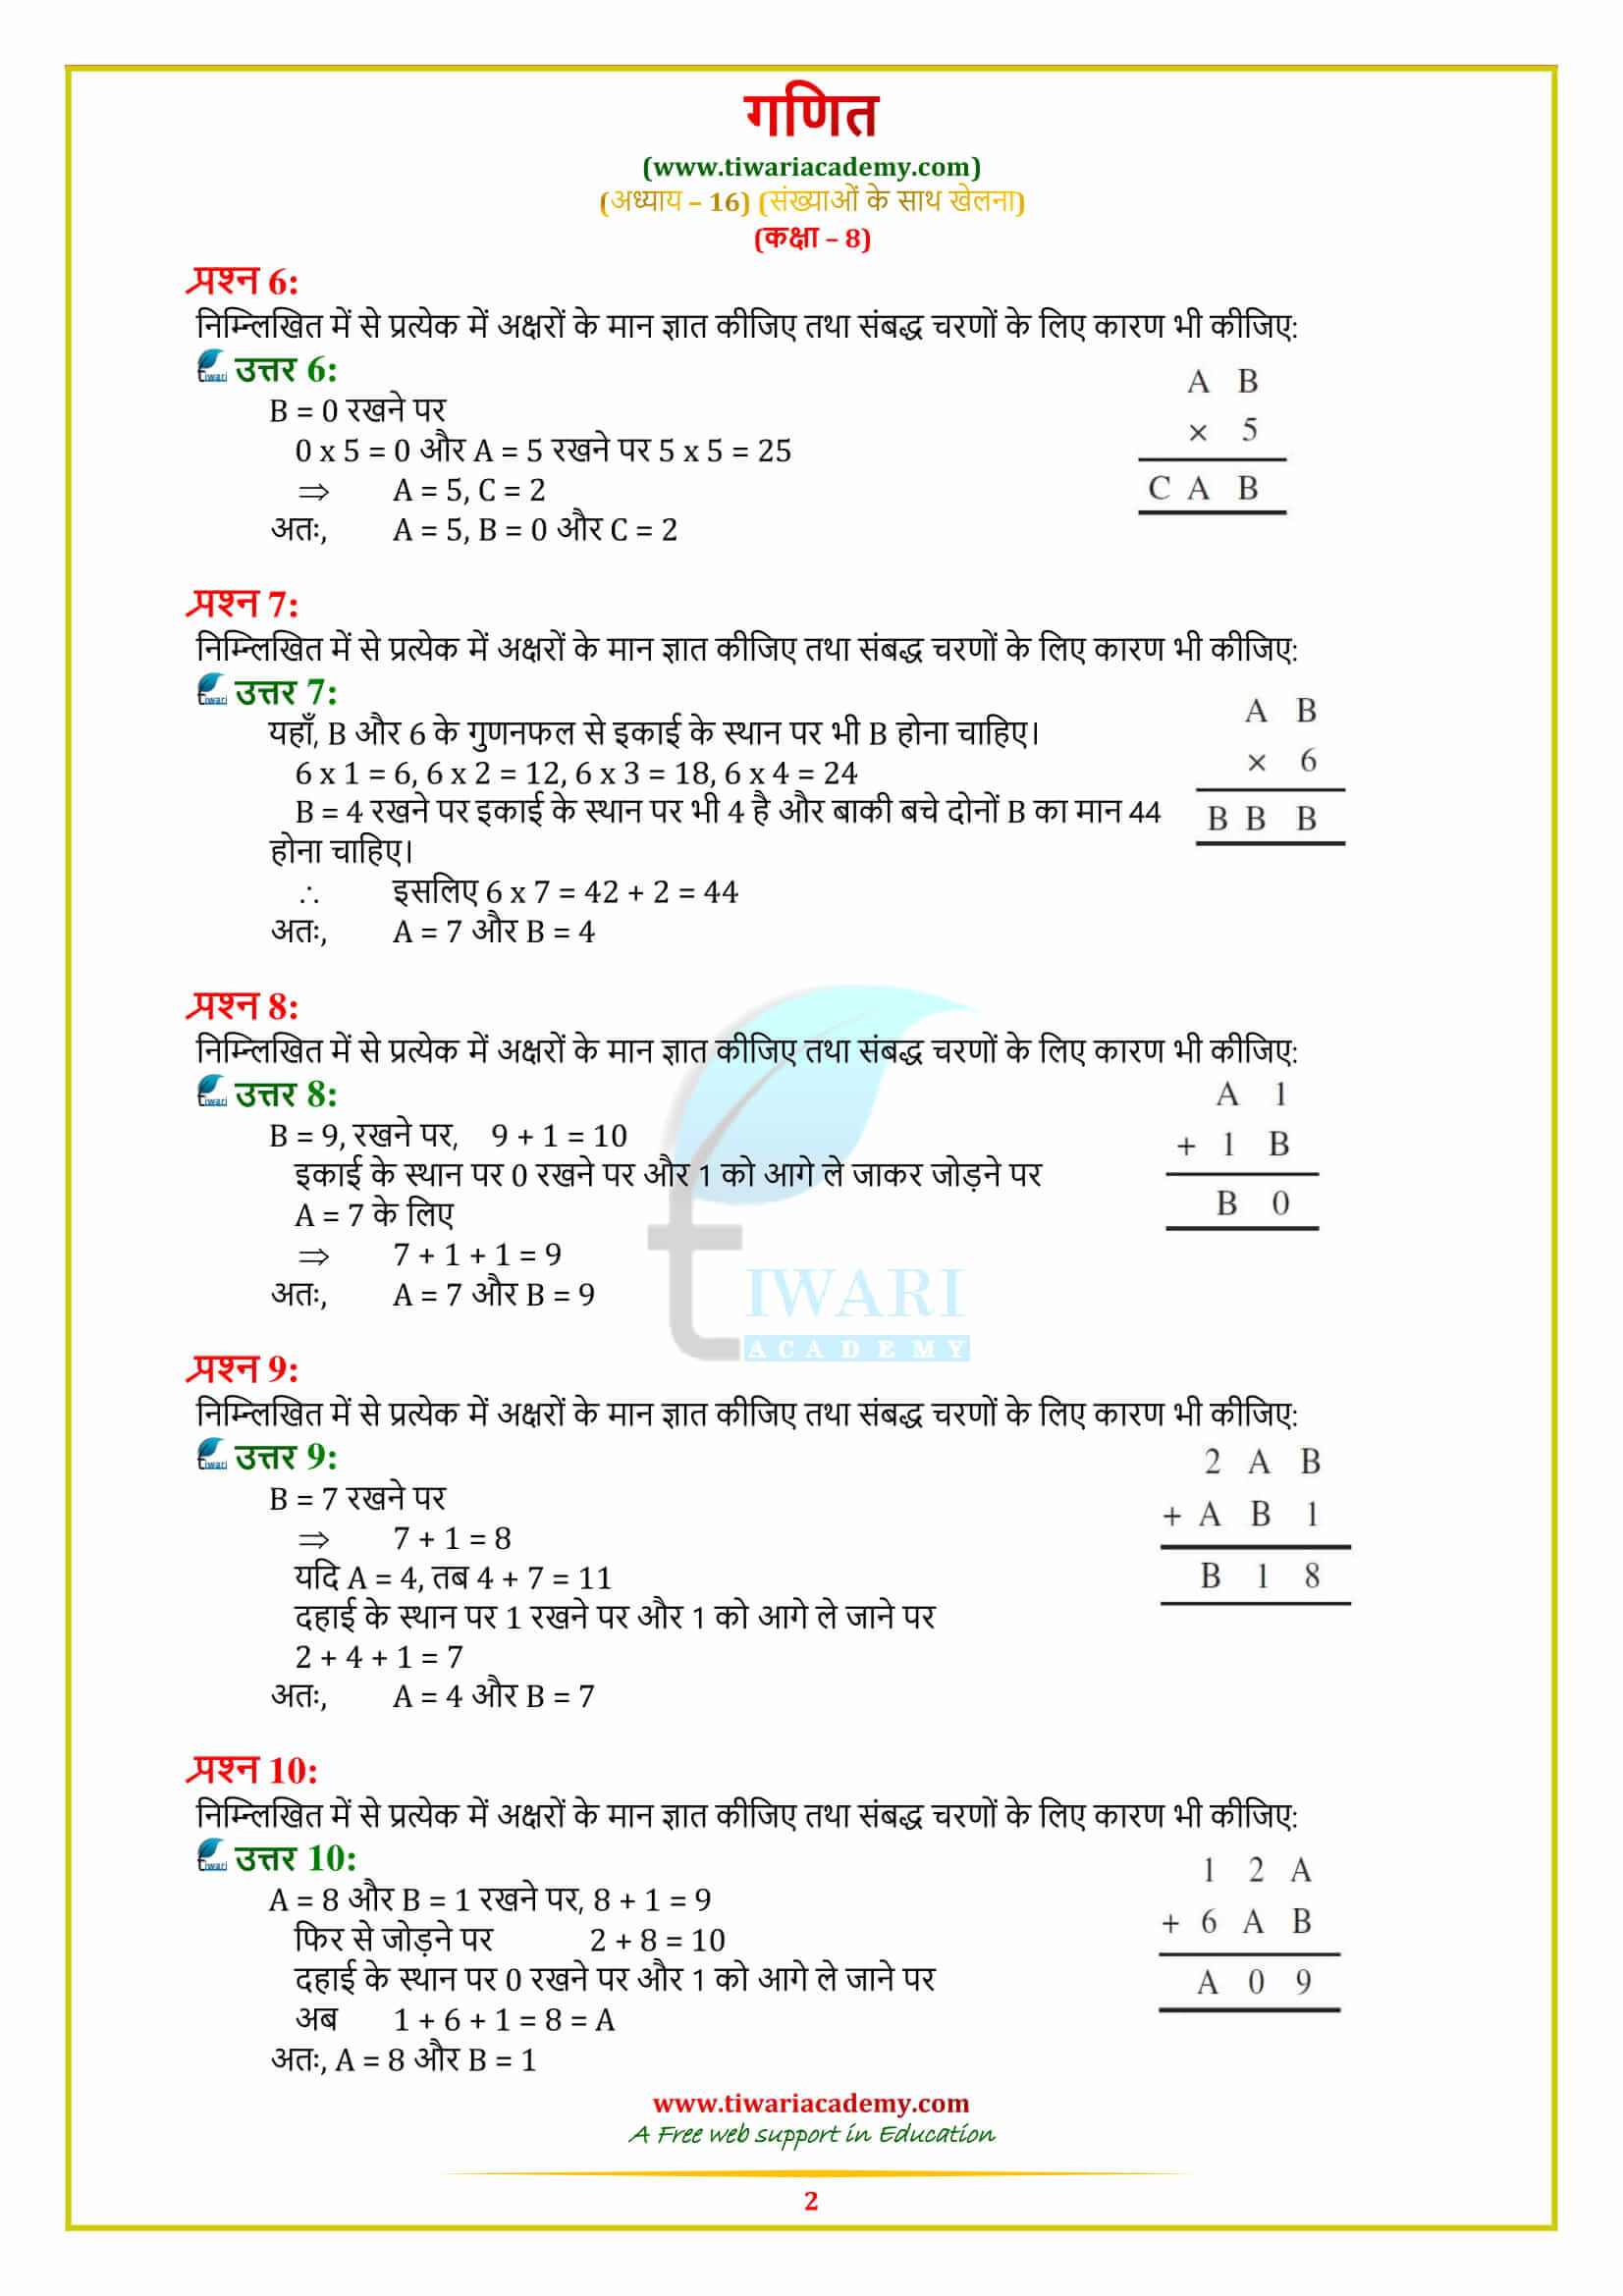 NCERT Solutions for Class 8 Maths Chapter 16 Exercise 16.1 in hindi medium